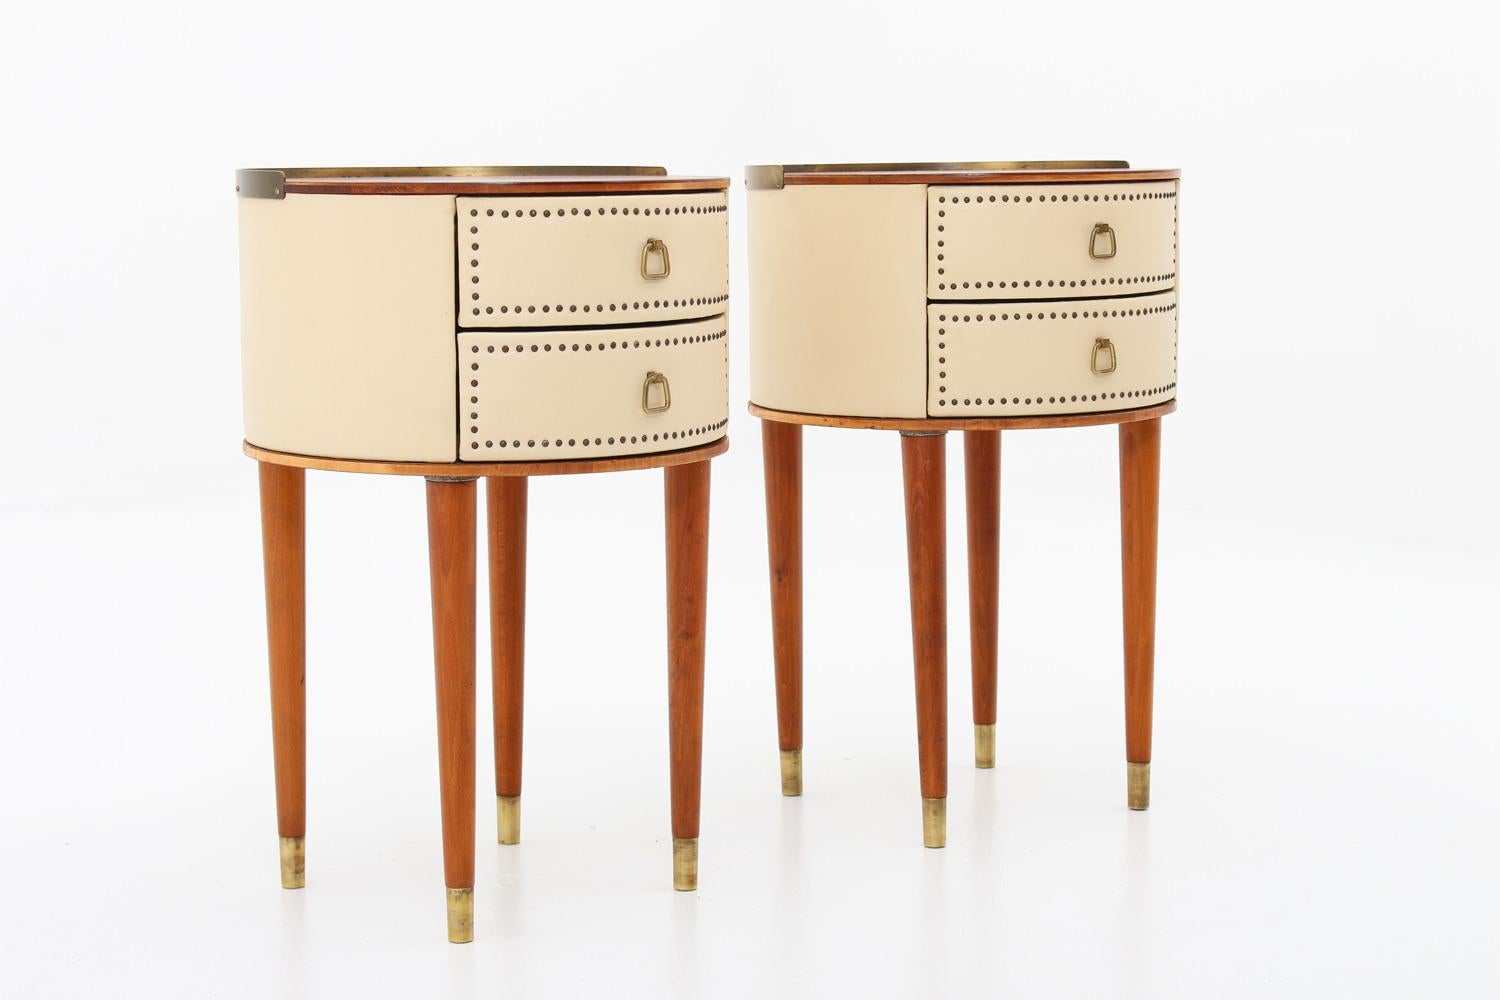 Designed by Halvdan Pettersson for Tibro Möbelfabrik, circa 1940.
These round bedside tables are covered in cream white faux leather with brass details. The tabletop is made of mahogany and the legs of stained beech.
Condition: Very good restored